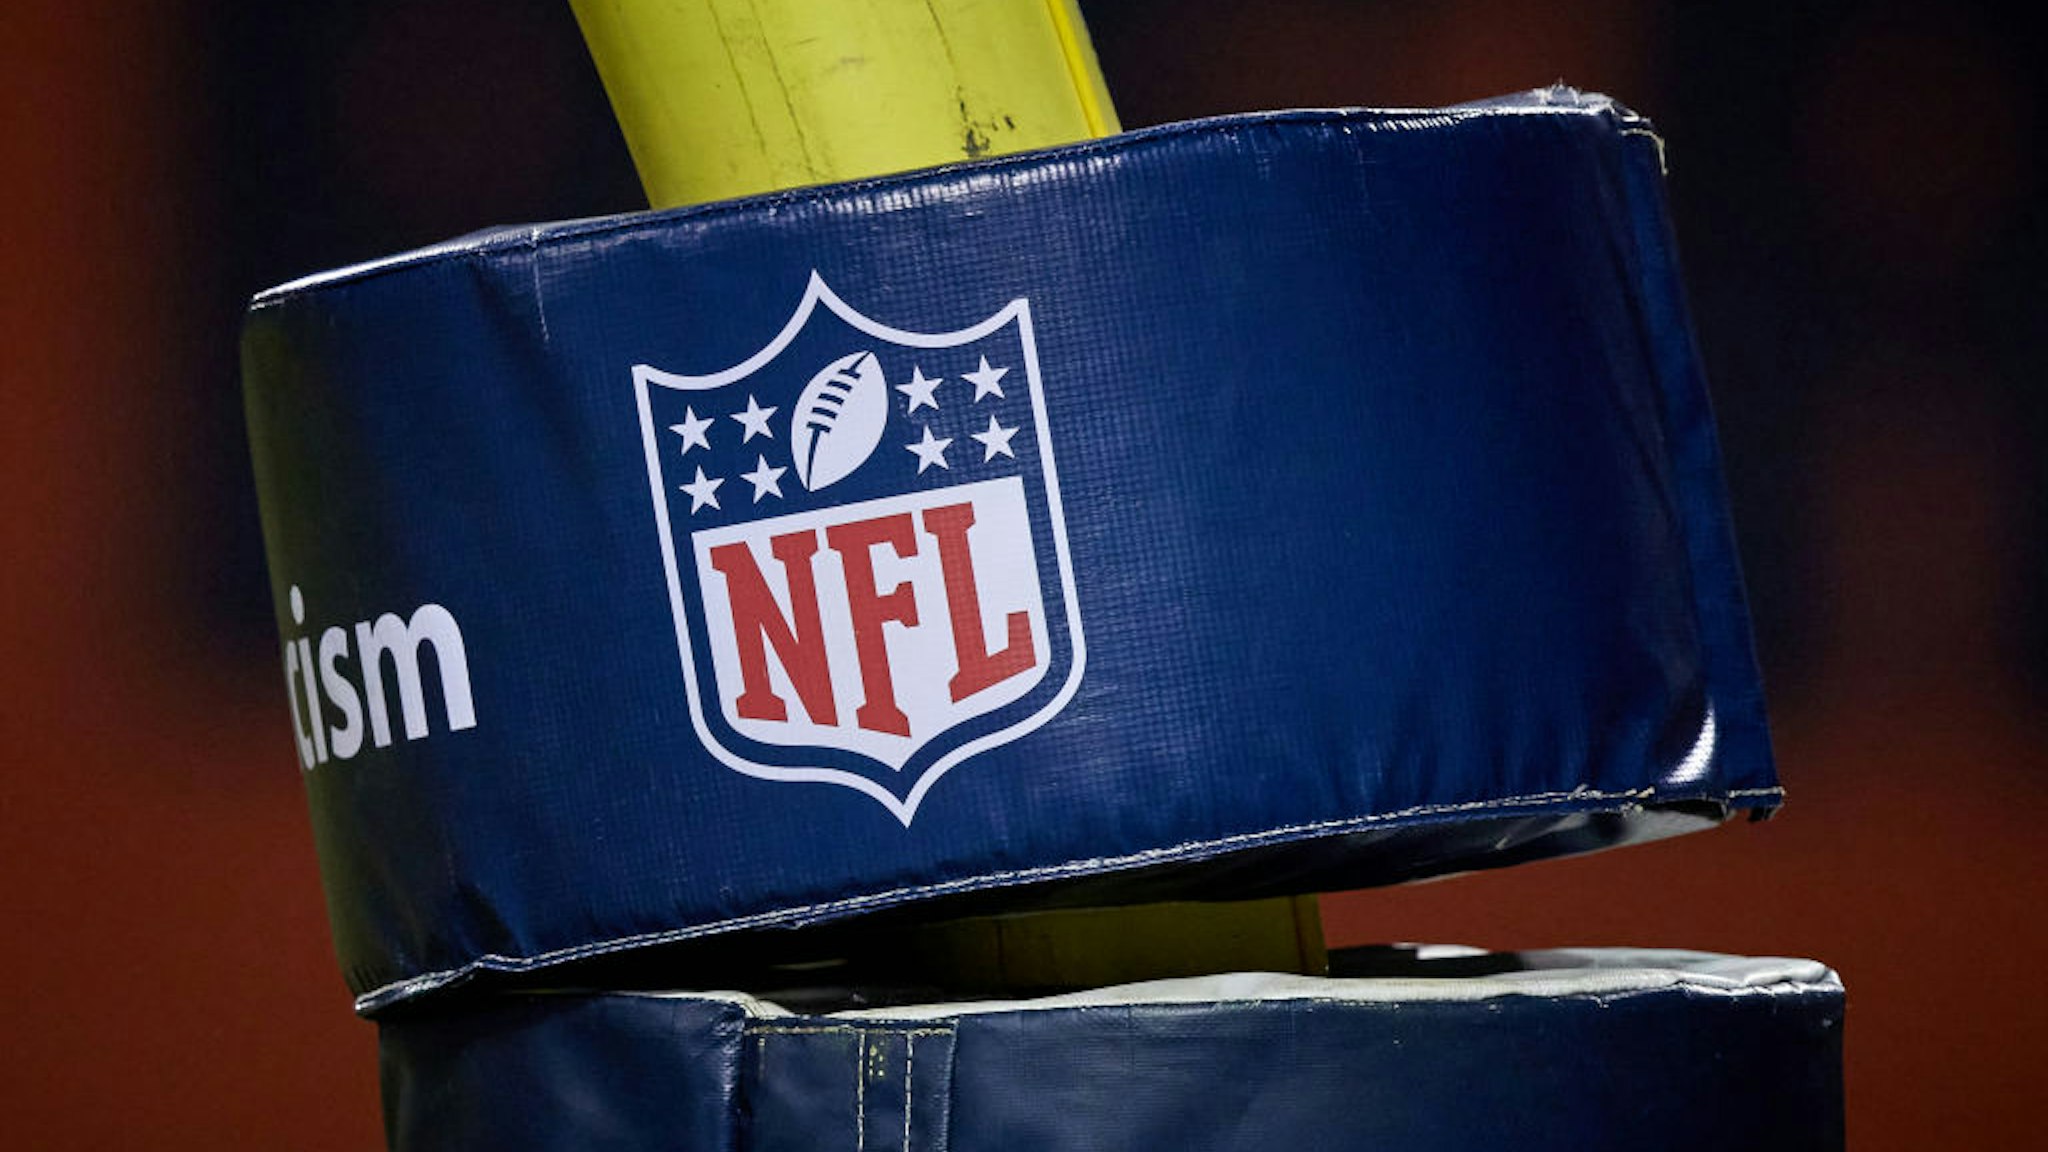 CHICAGO, IL - JANUARY 03: A detailed view of the NFL crest logo is seen on a goal post pad in action during a game between the Chicago Bears and the Green Bay Packers on January 03, 2021 at Soldier Field in Chicago, IL. (Photo by Robin Alam/Icon Sportswire via Getty Images)